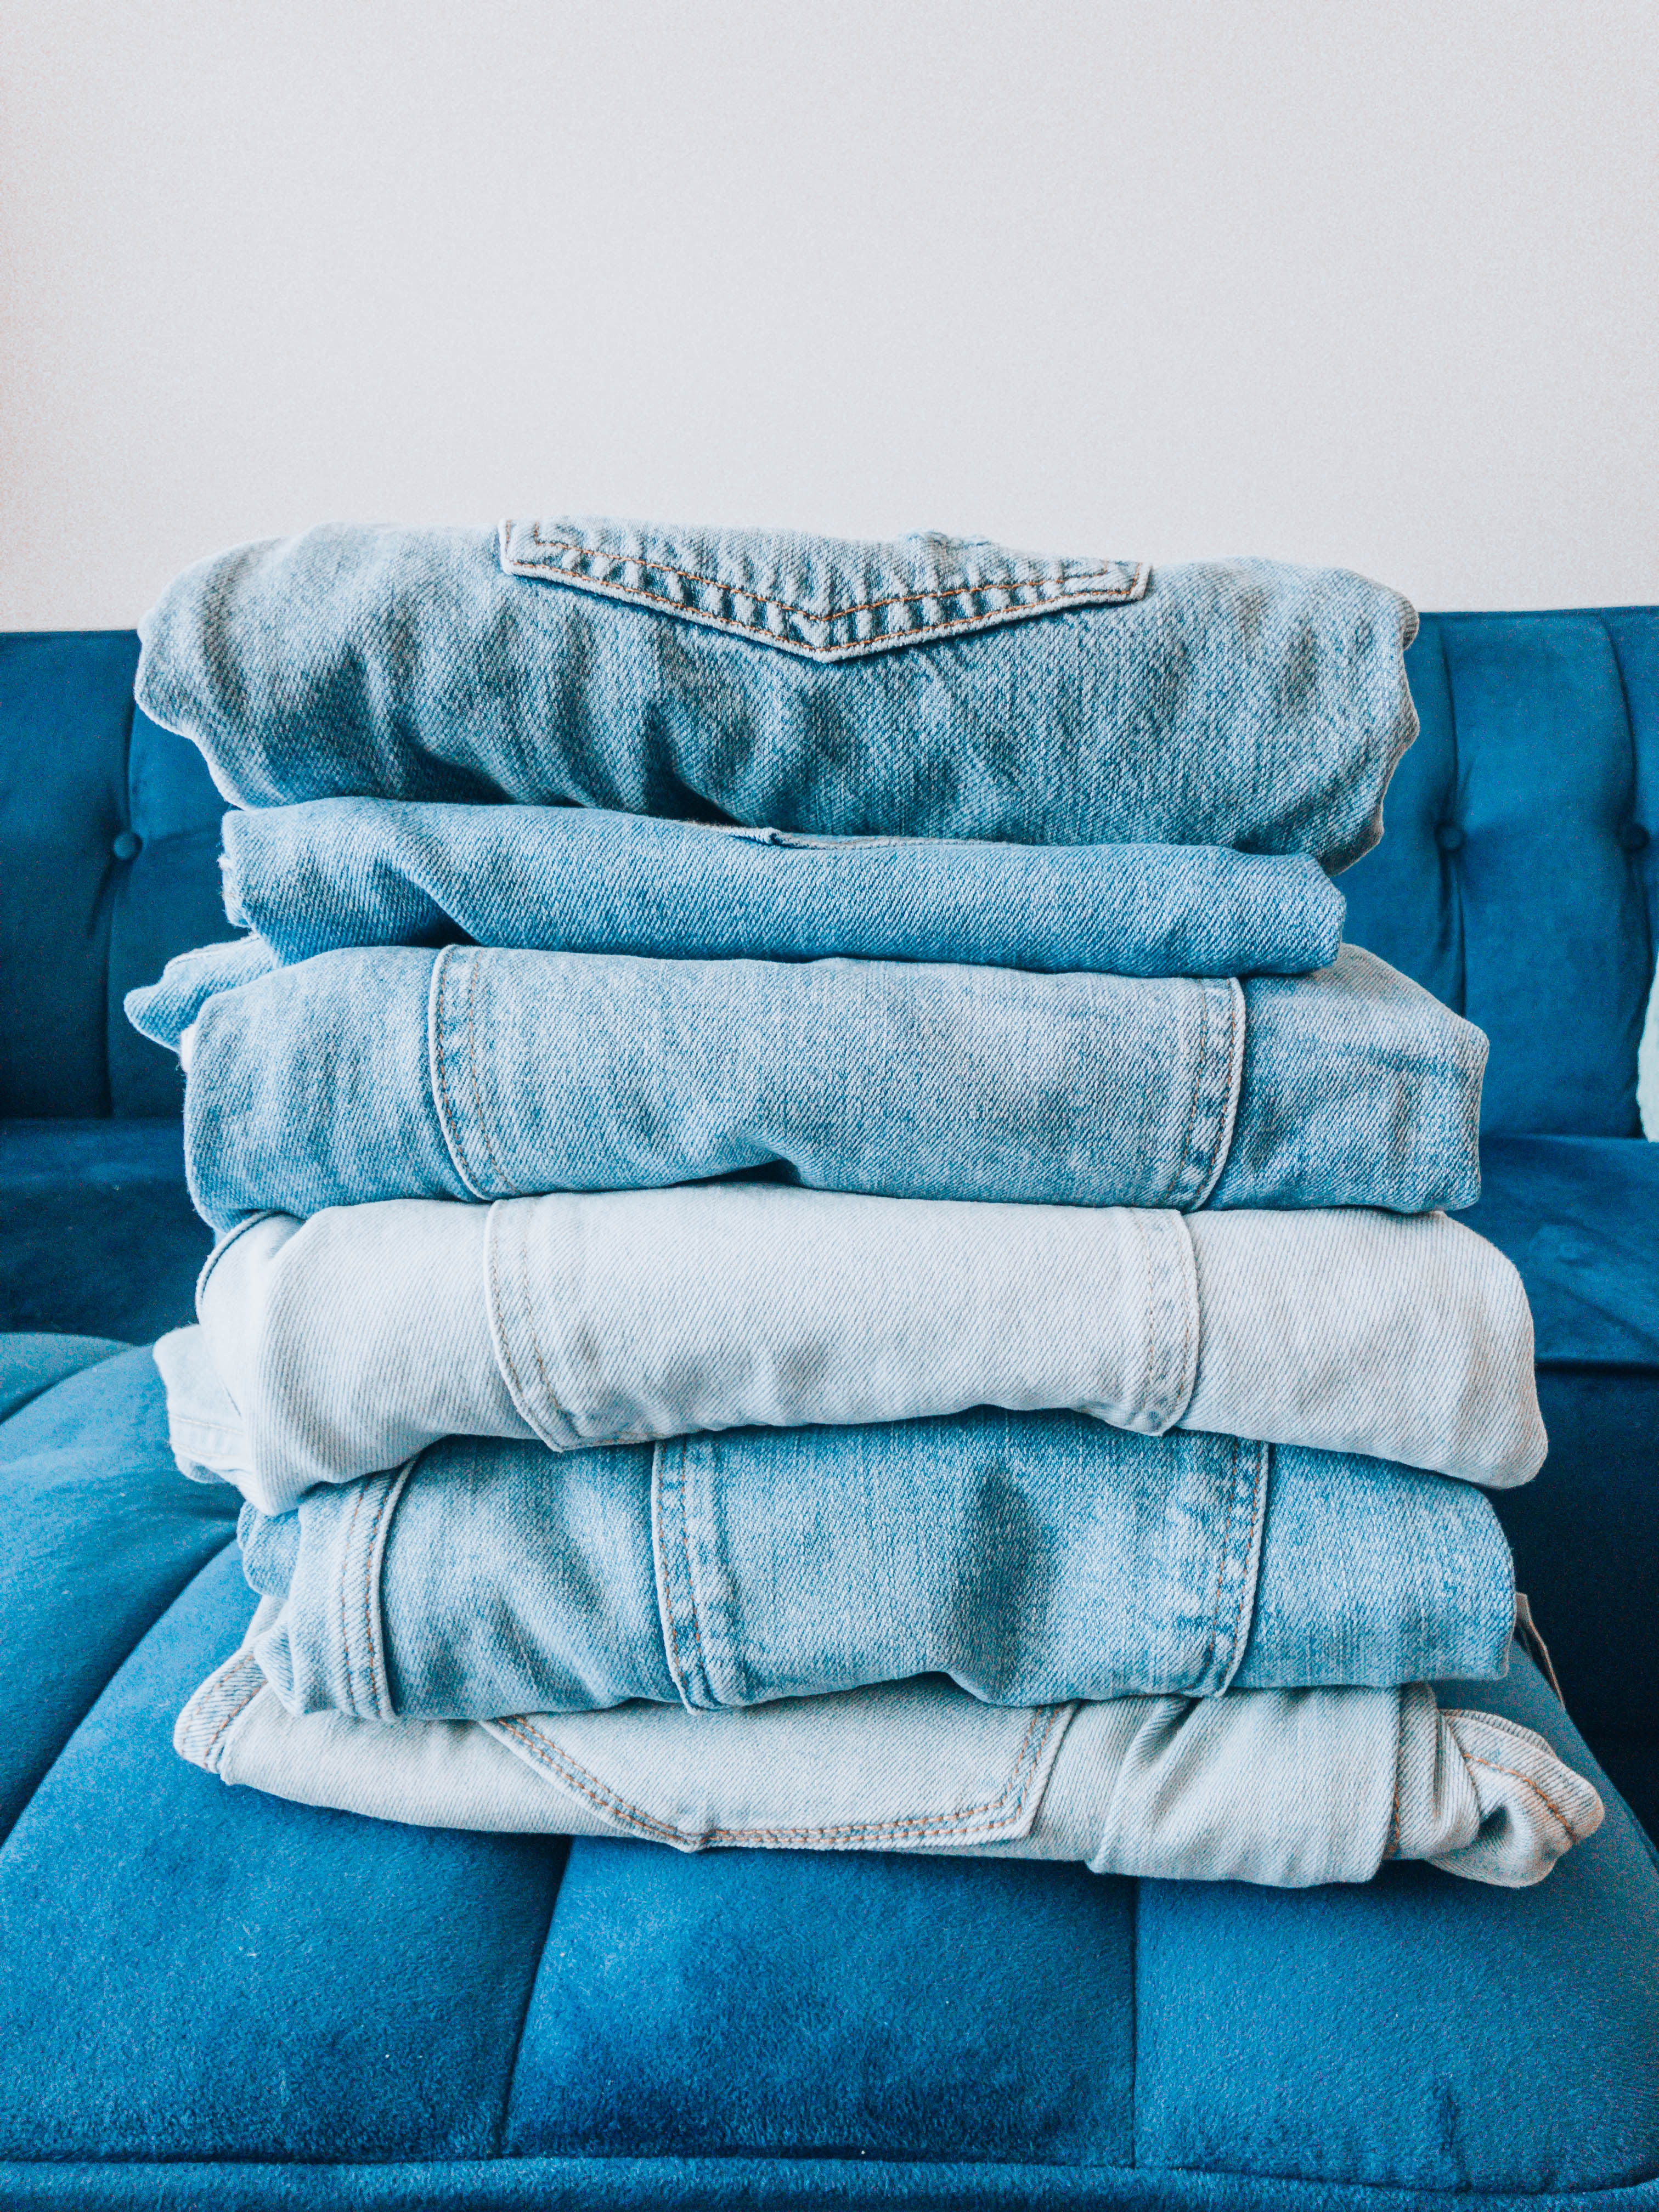 A stack of jeans sitting on a blue velvet couch